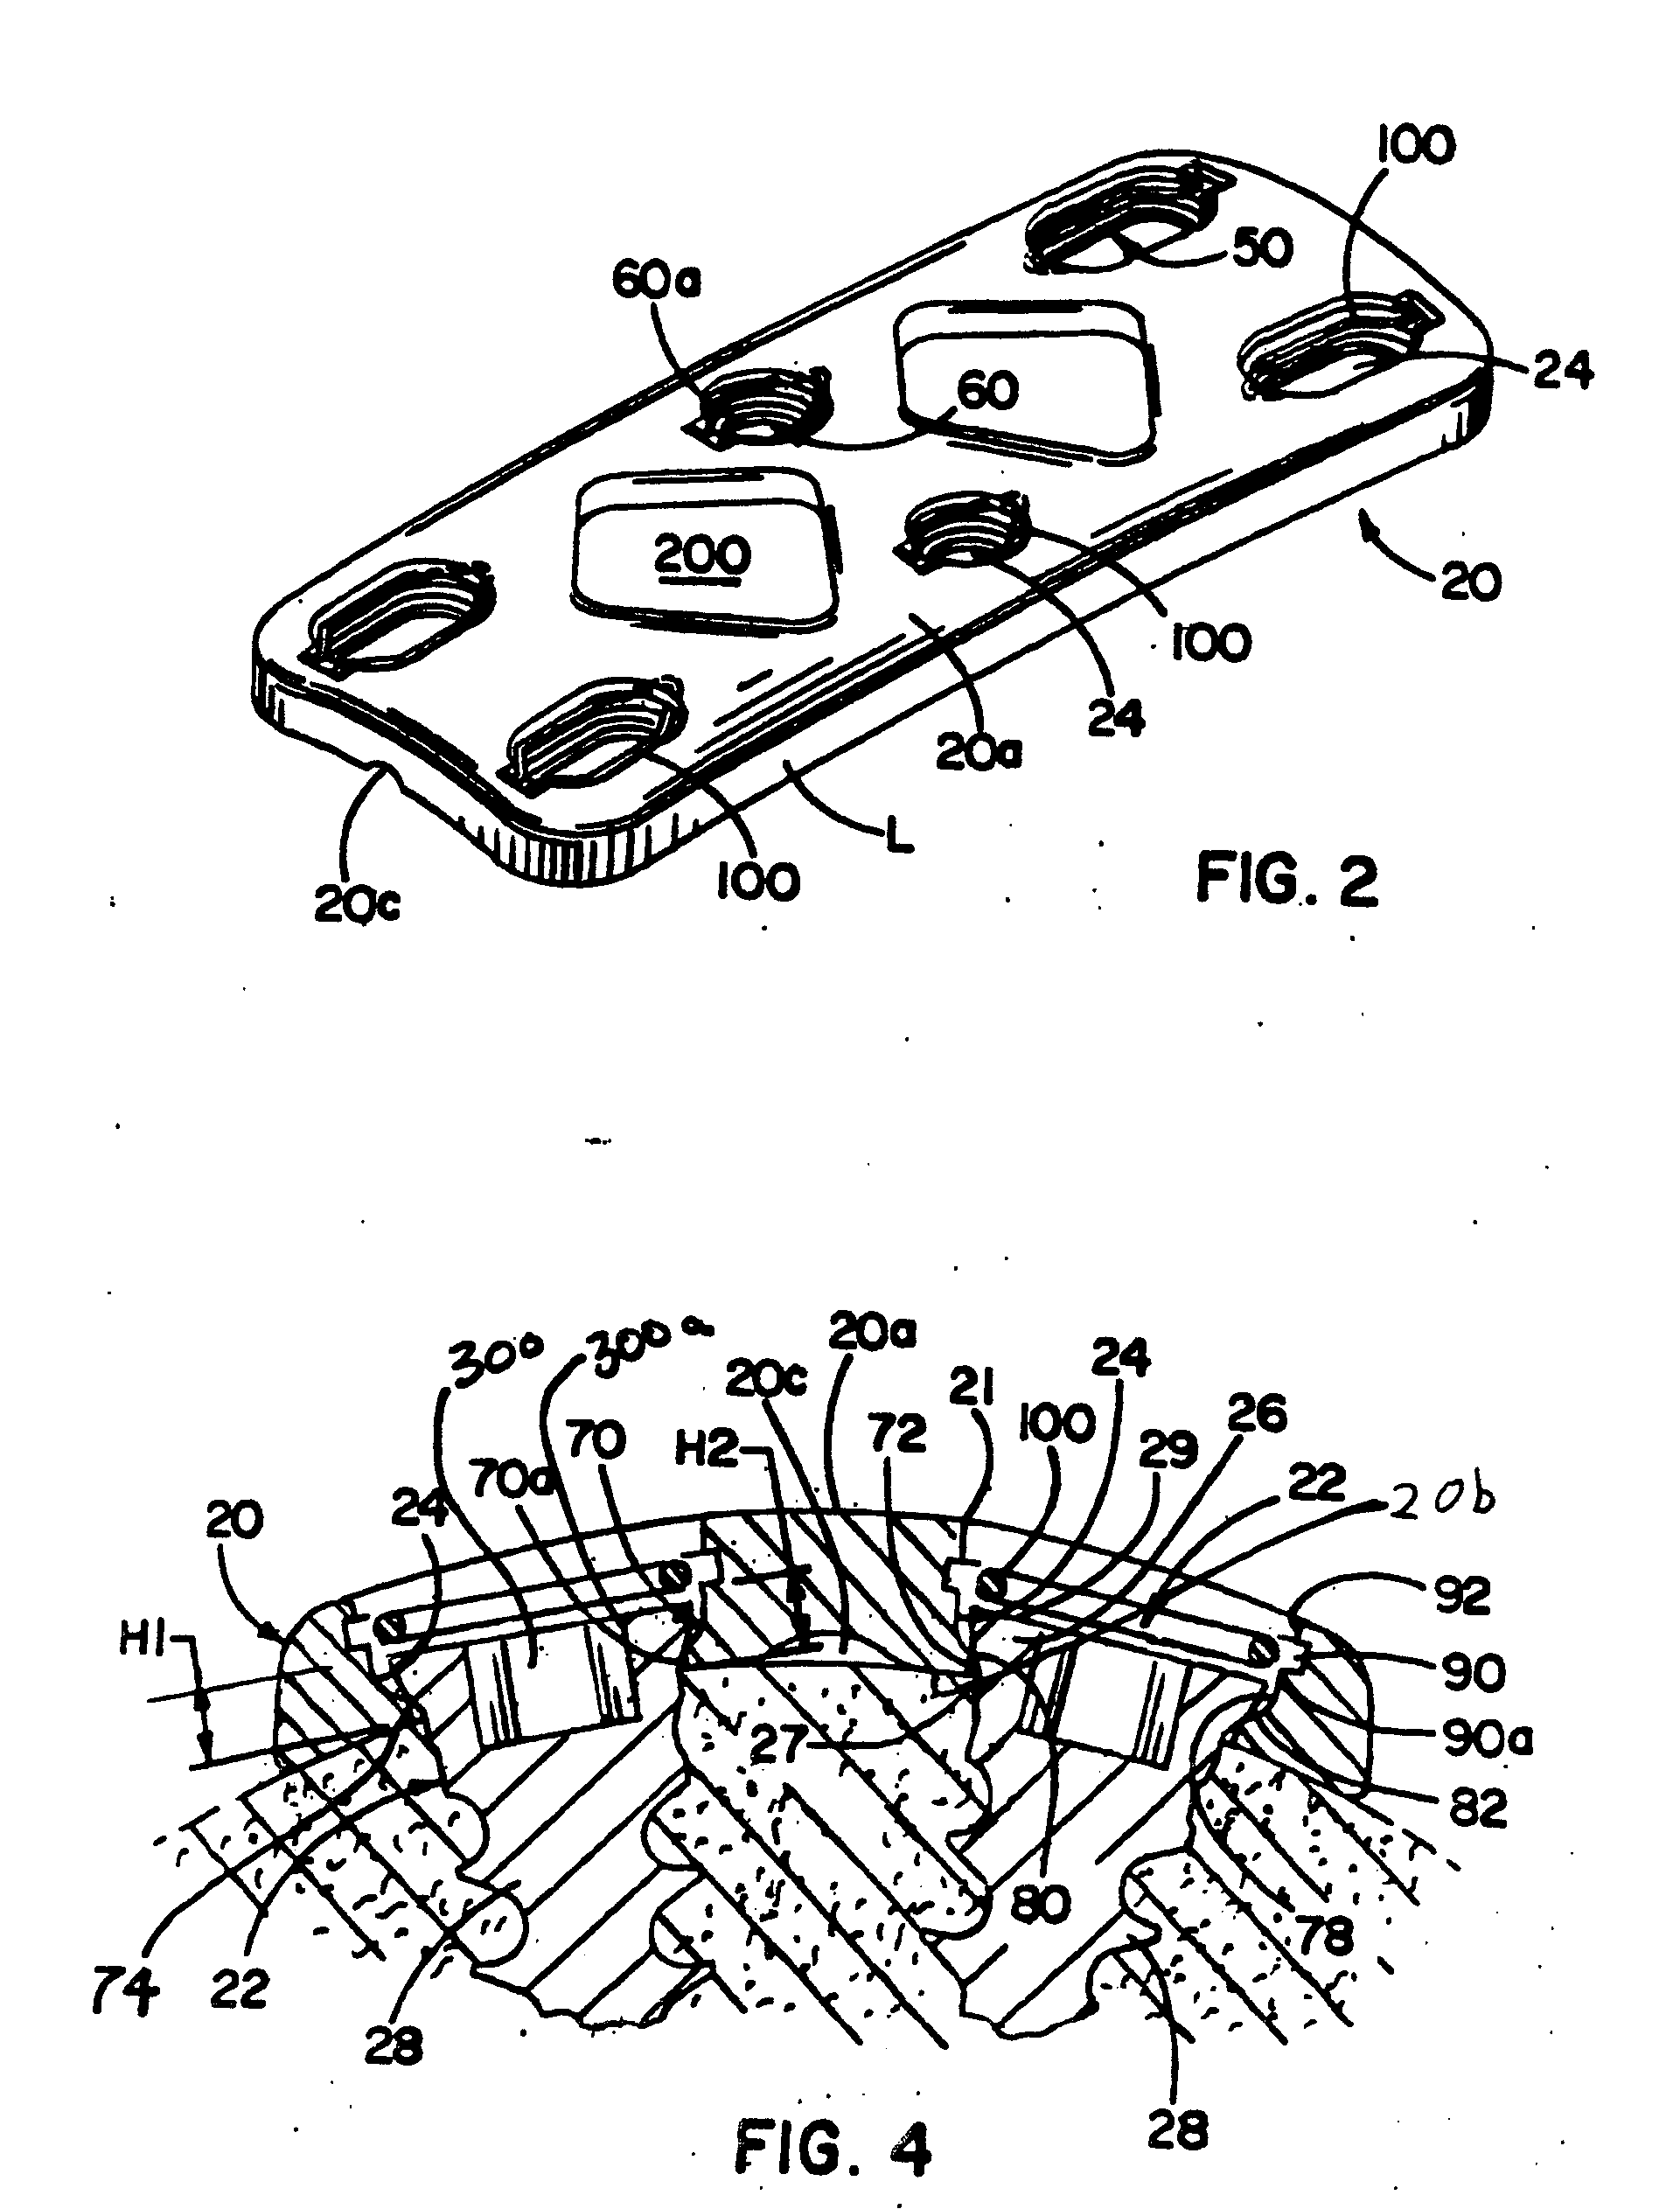 Bone plate system and methods